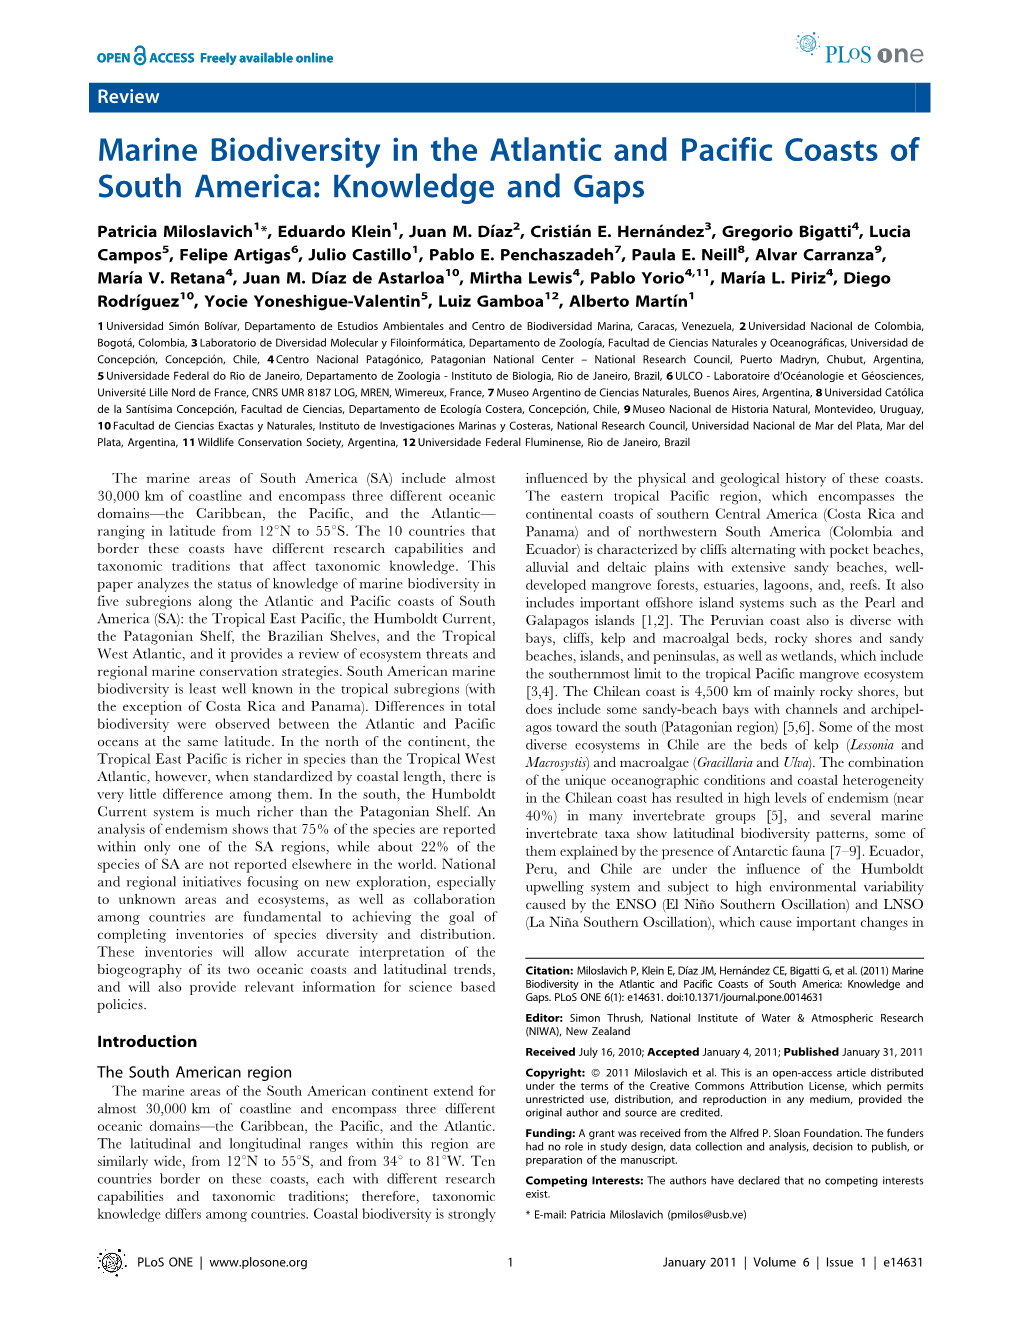 Marine Biodiversity in the Atlantic and Pacific Coasts of South America: Knowledge and Gaps